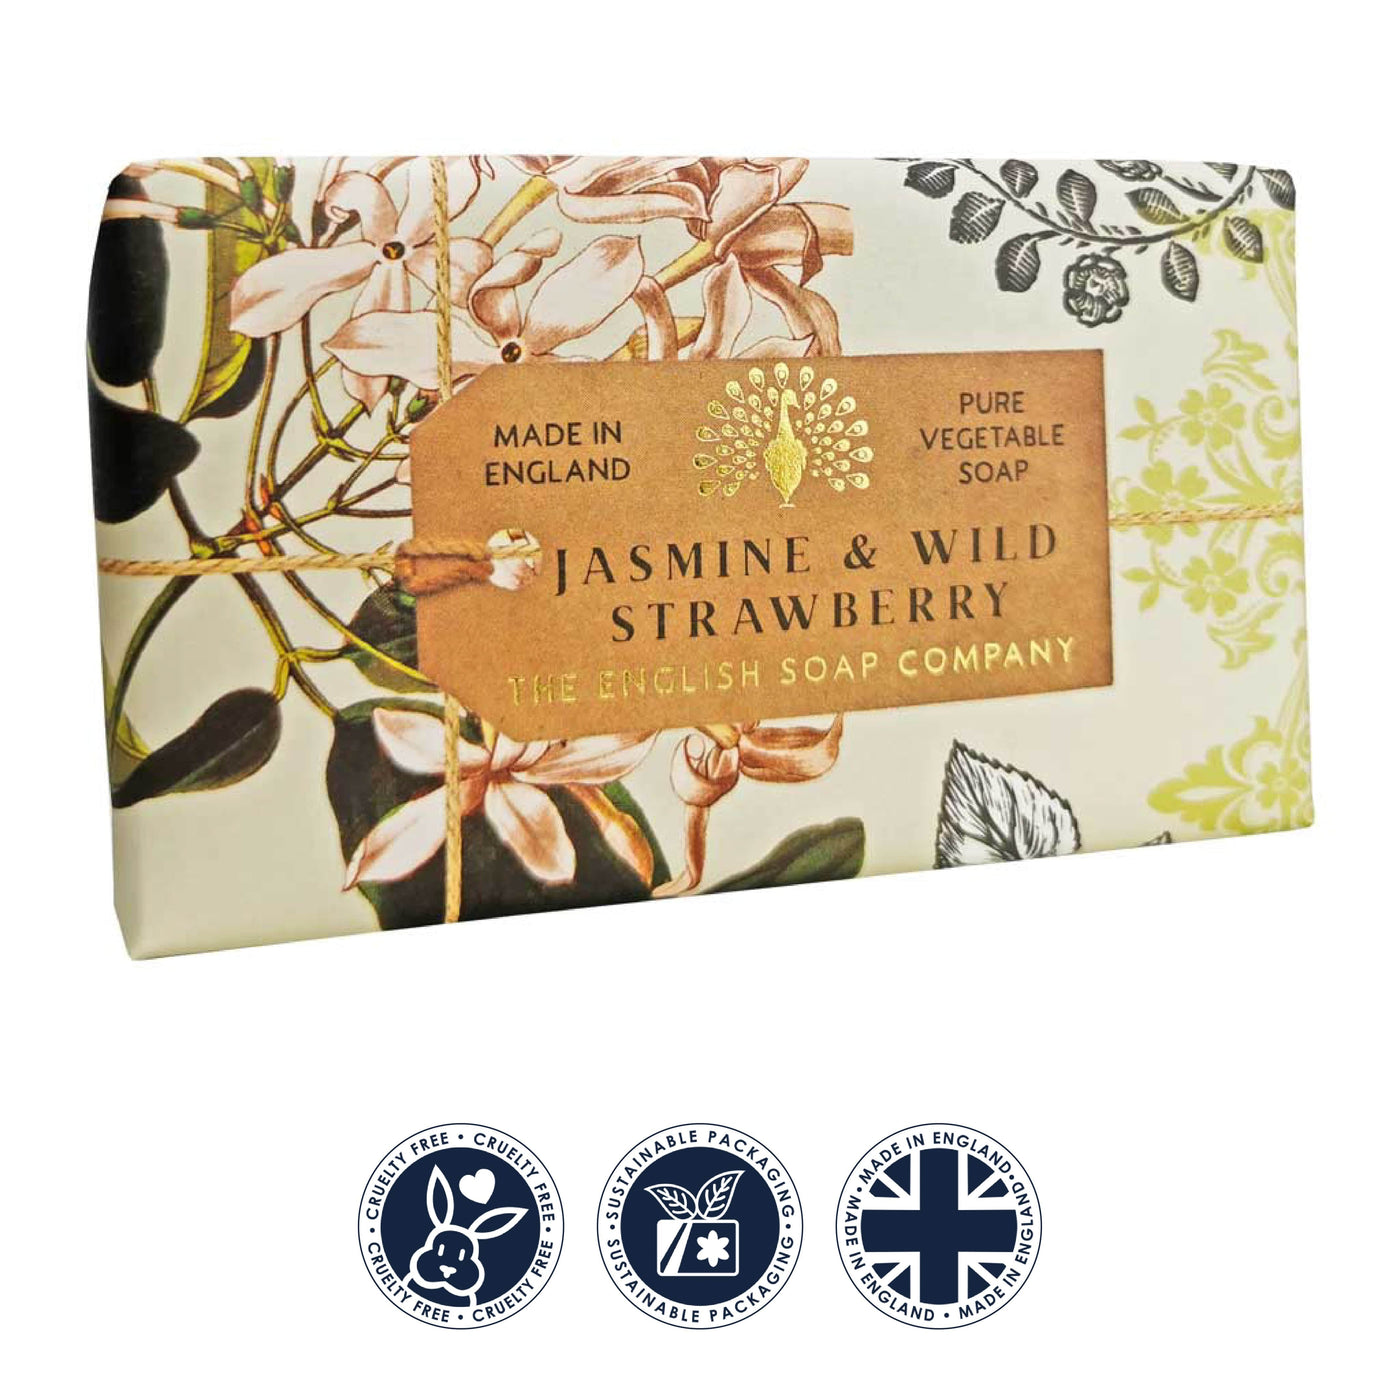 Anniversary Jasmine and Wild Strawberry Soap Bar from our Luxury Bar Soap collection by The English Soap Company